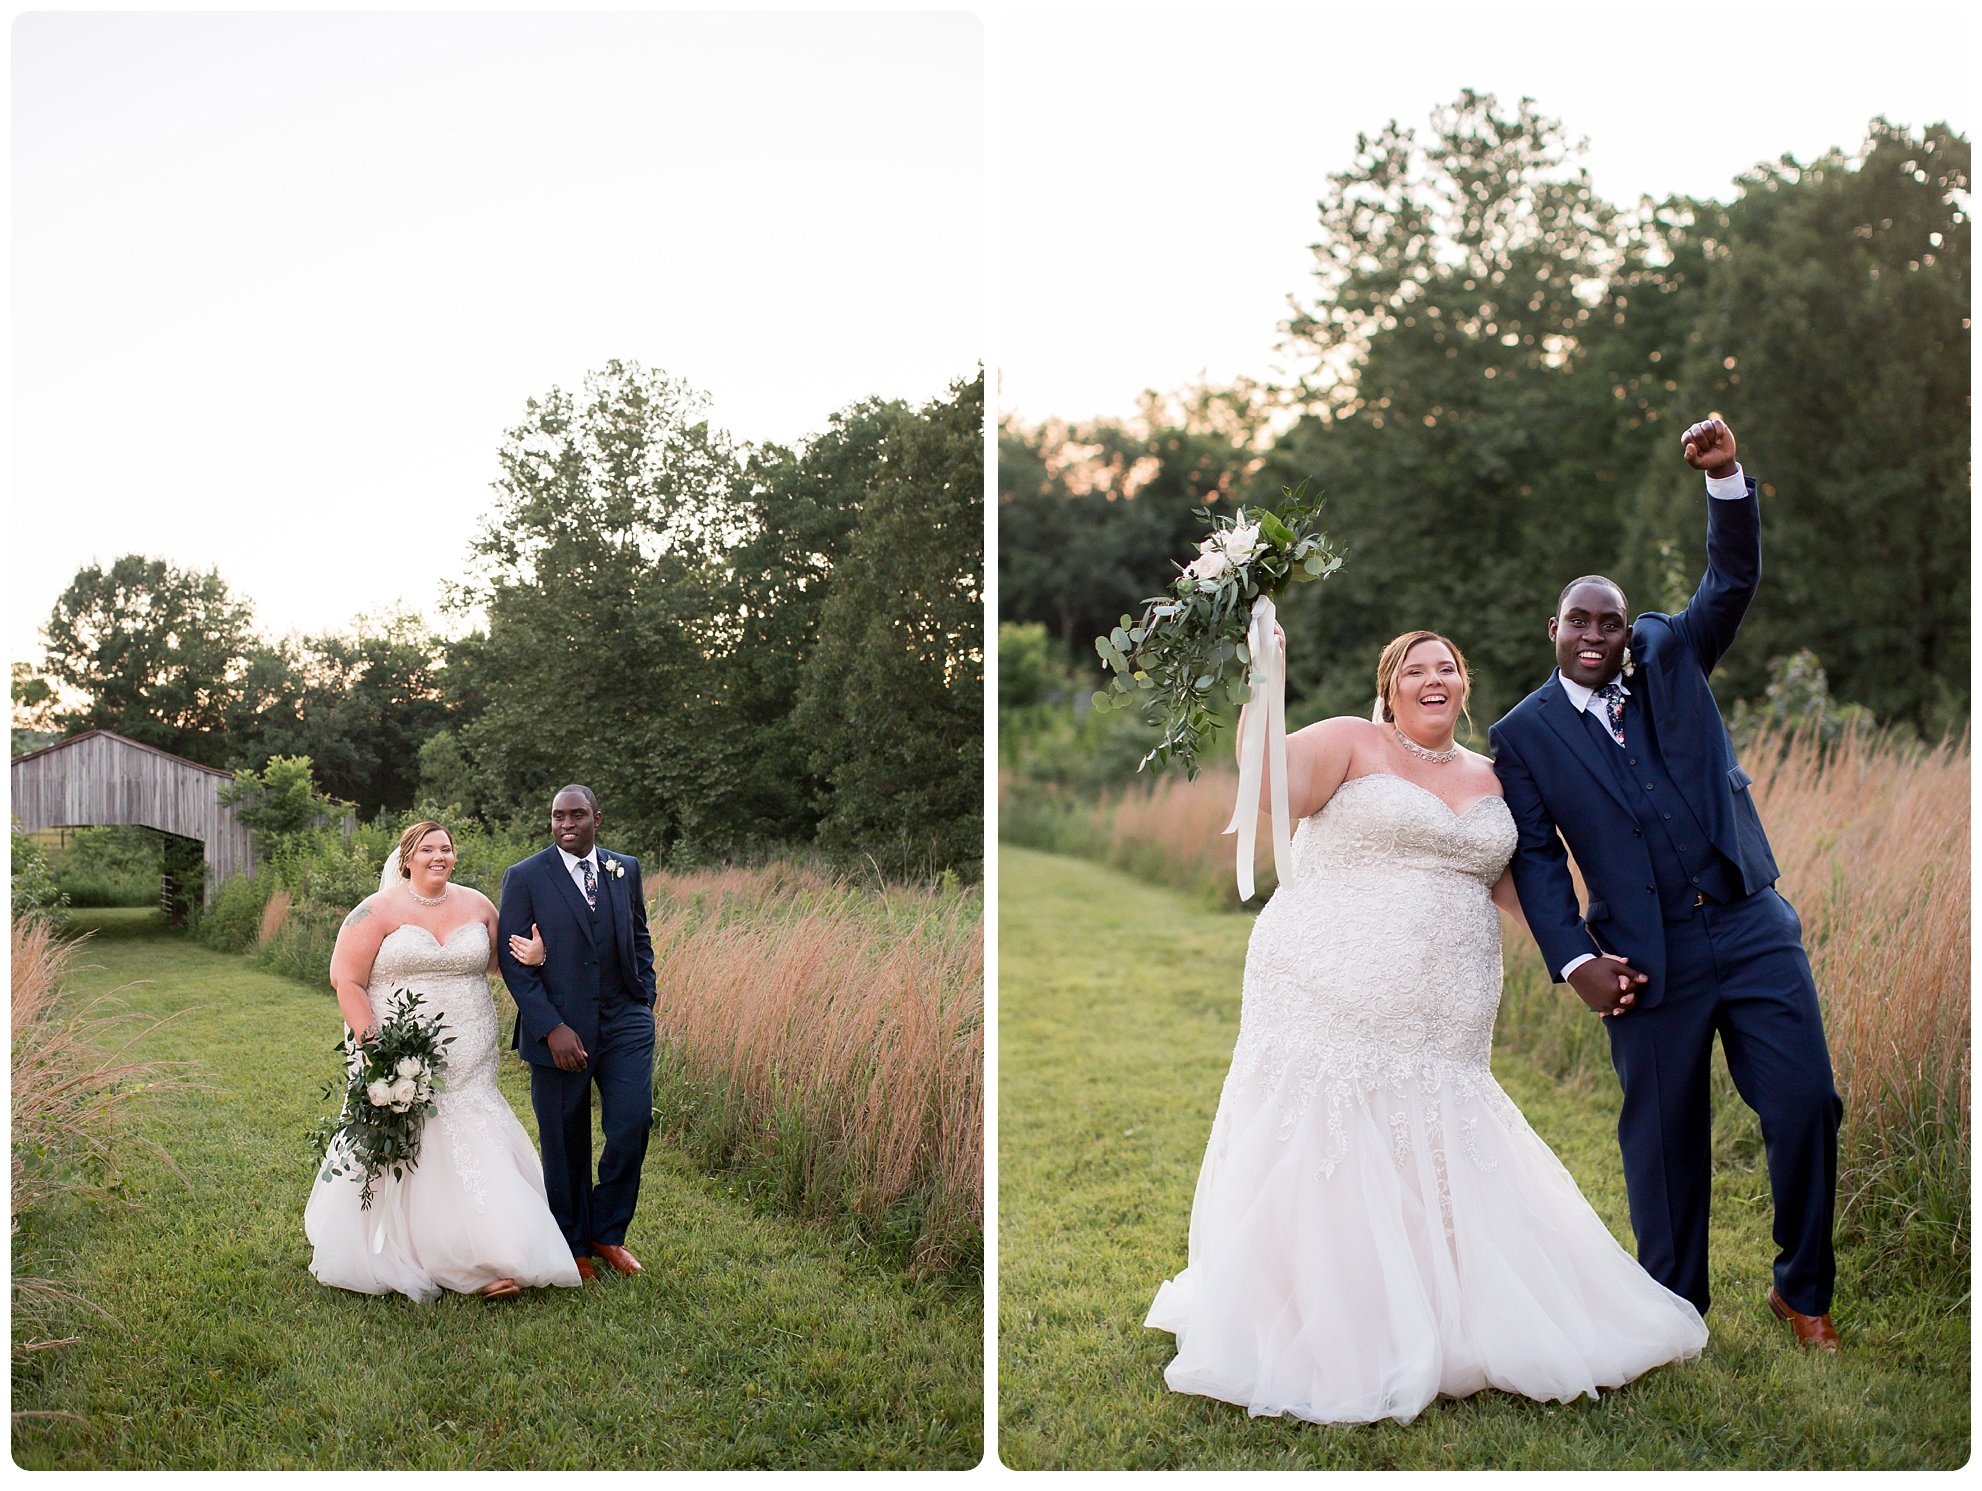 Nashville wedding at Iriswoods, Southern Belles and Blooms, navy tuxedo, whimsical garden wedding, southern wedding, southern bride, nashville bride, melanie grady photography, the best nashville wedding photographer, interracial couple wedding, mt juliet, golden hour portraits